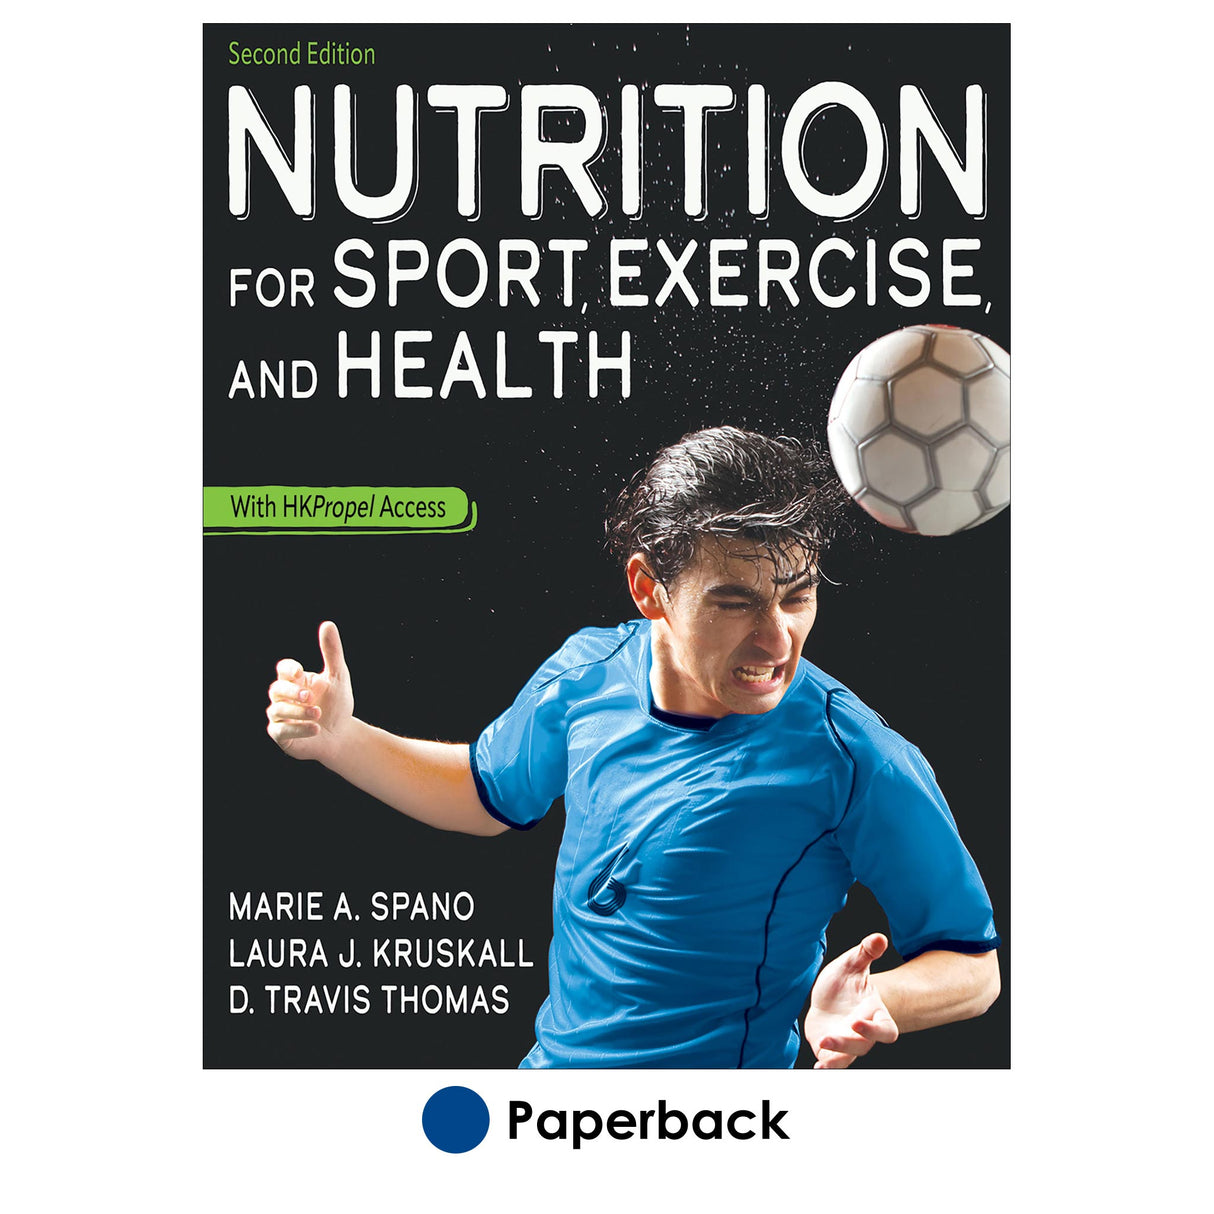 Nutrition for Sport, Exercise, and Health 2nd Edition With HKPropel Access